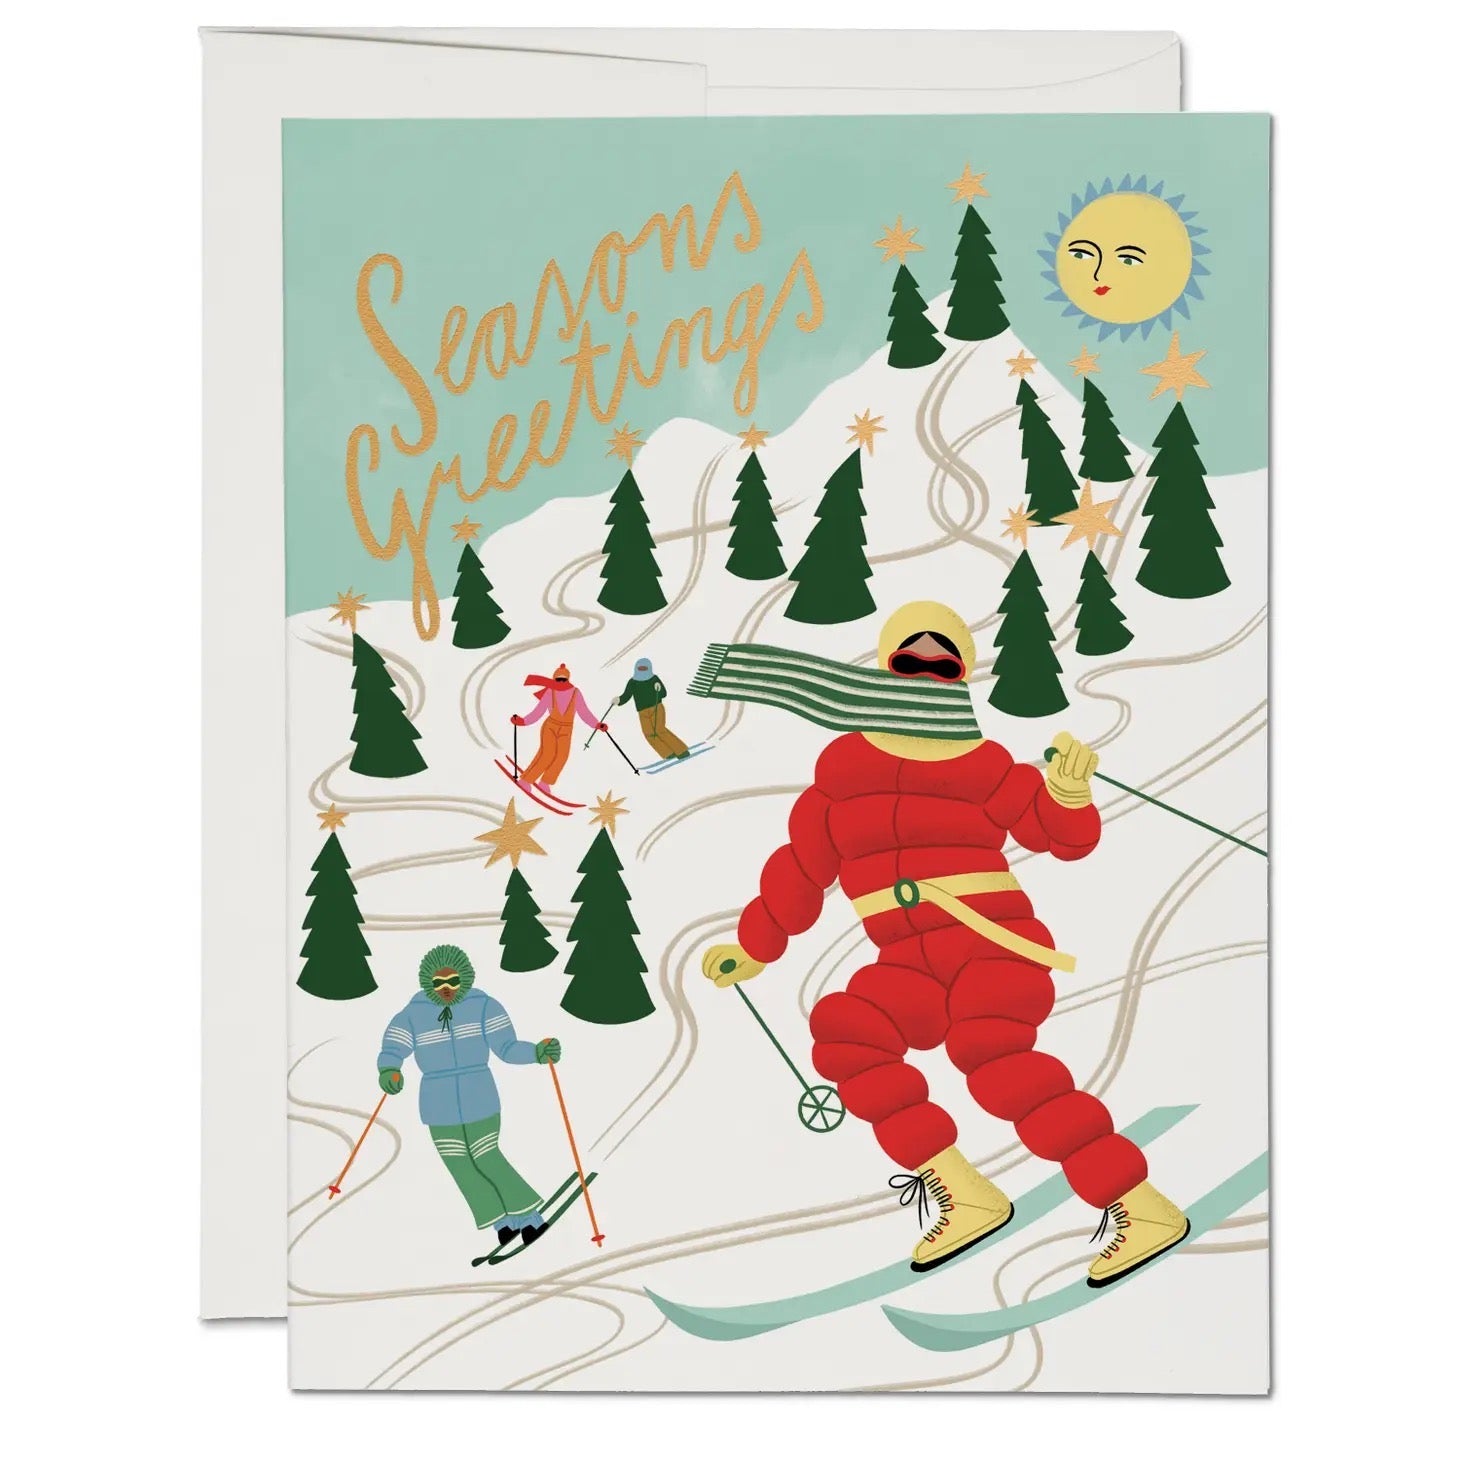 Holiday Cards by Red Cap Cards